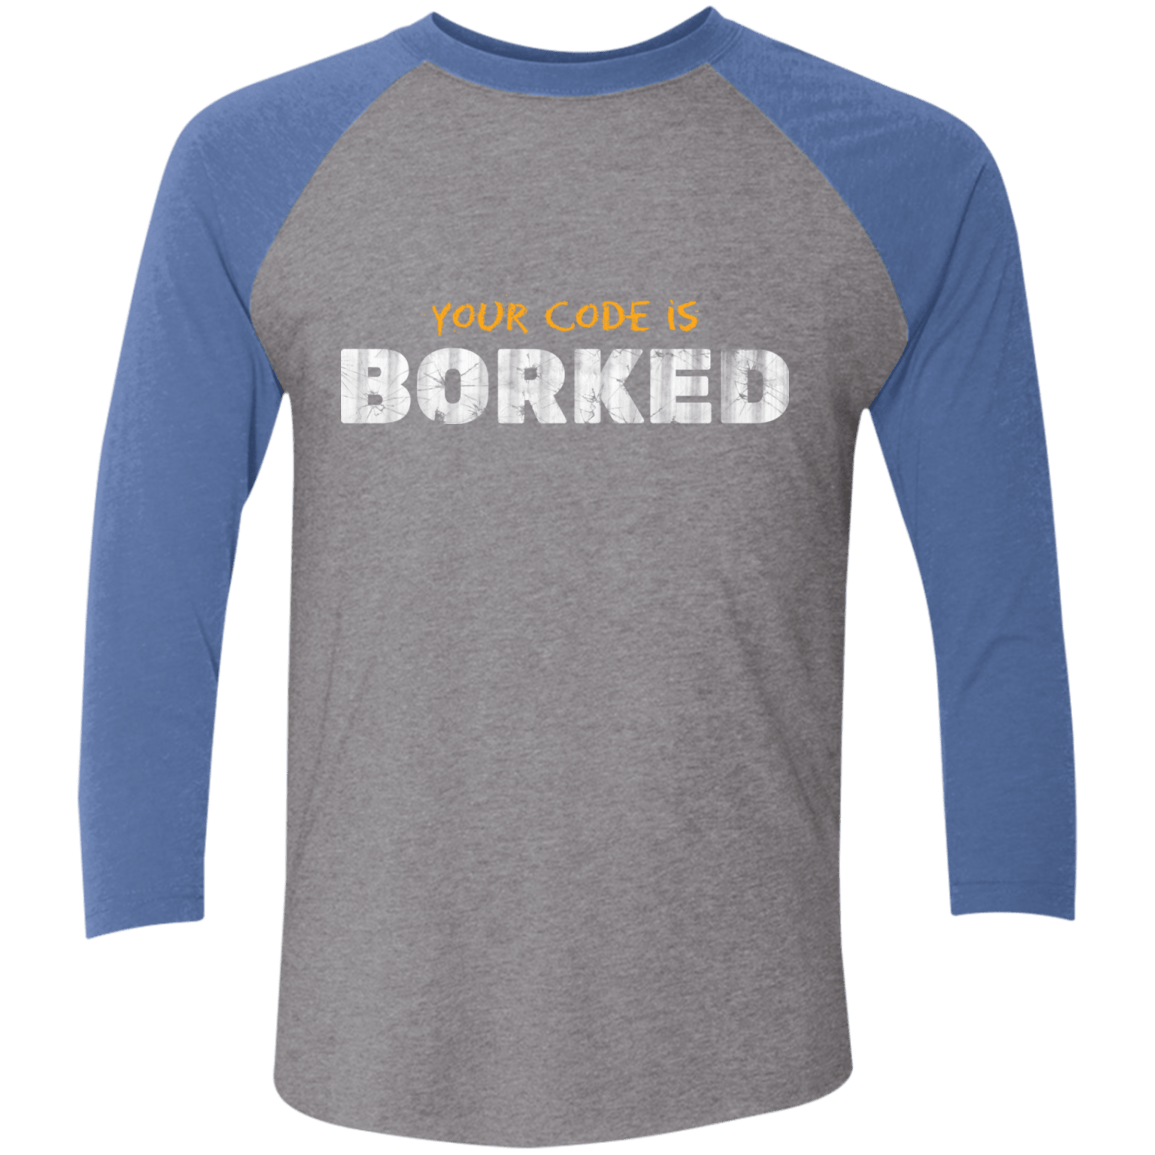 T-Shirts Premium Heather/Vintage Royal / X-Small Your Code Is Borked Men's Triblend 3/4 Sleeve